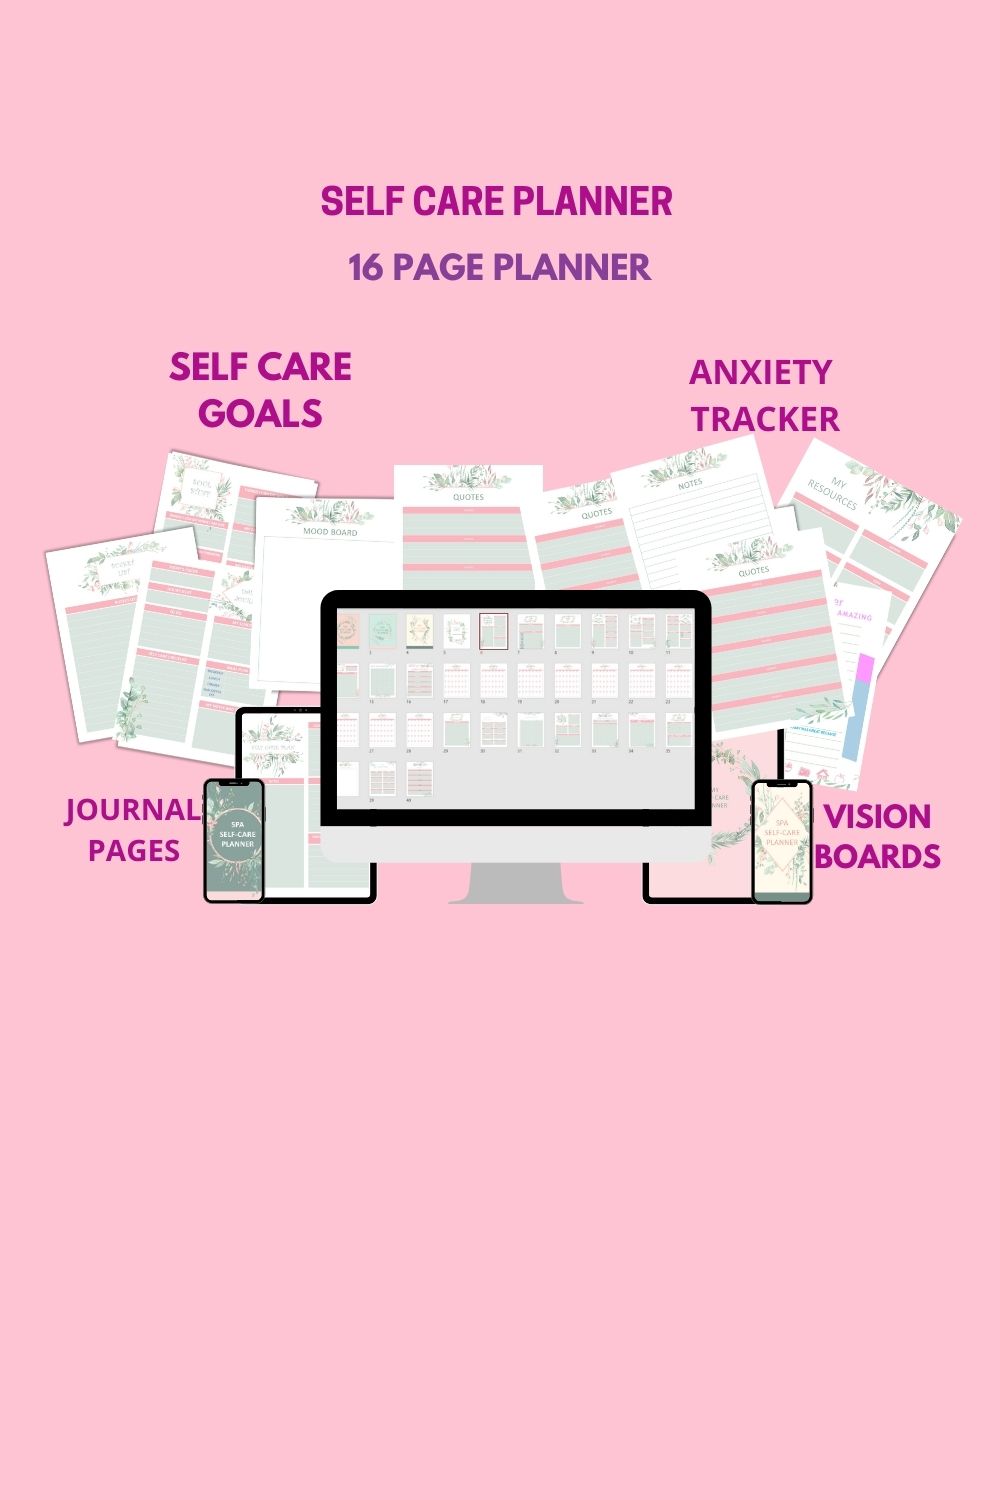 Self care planners to help you start the new year the right way! Make 2021 the best year yet!